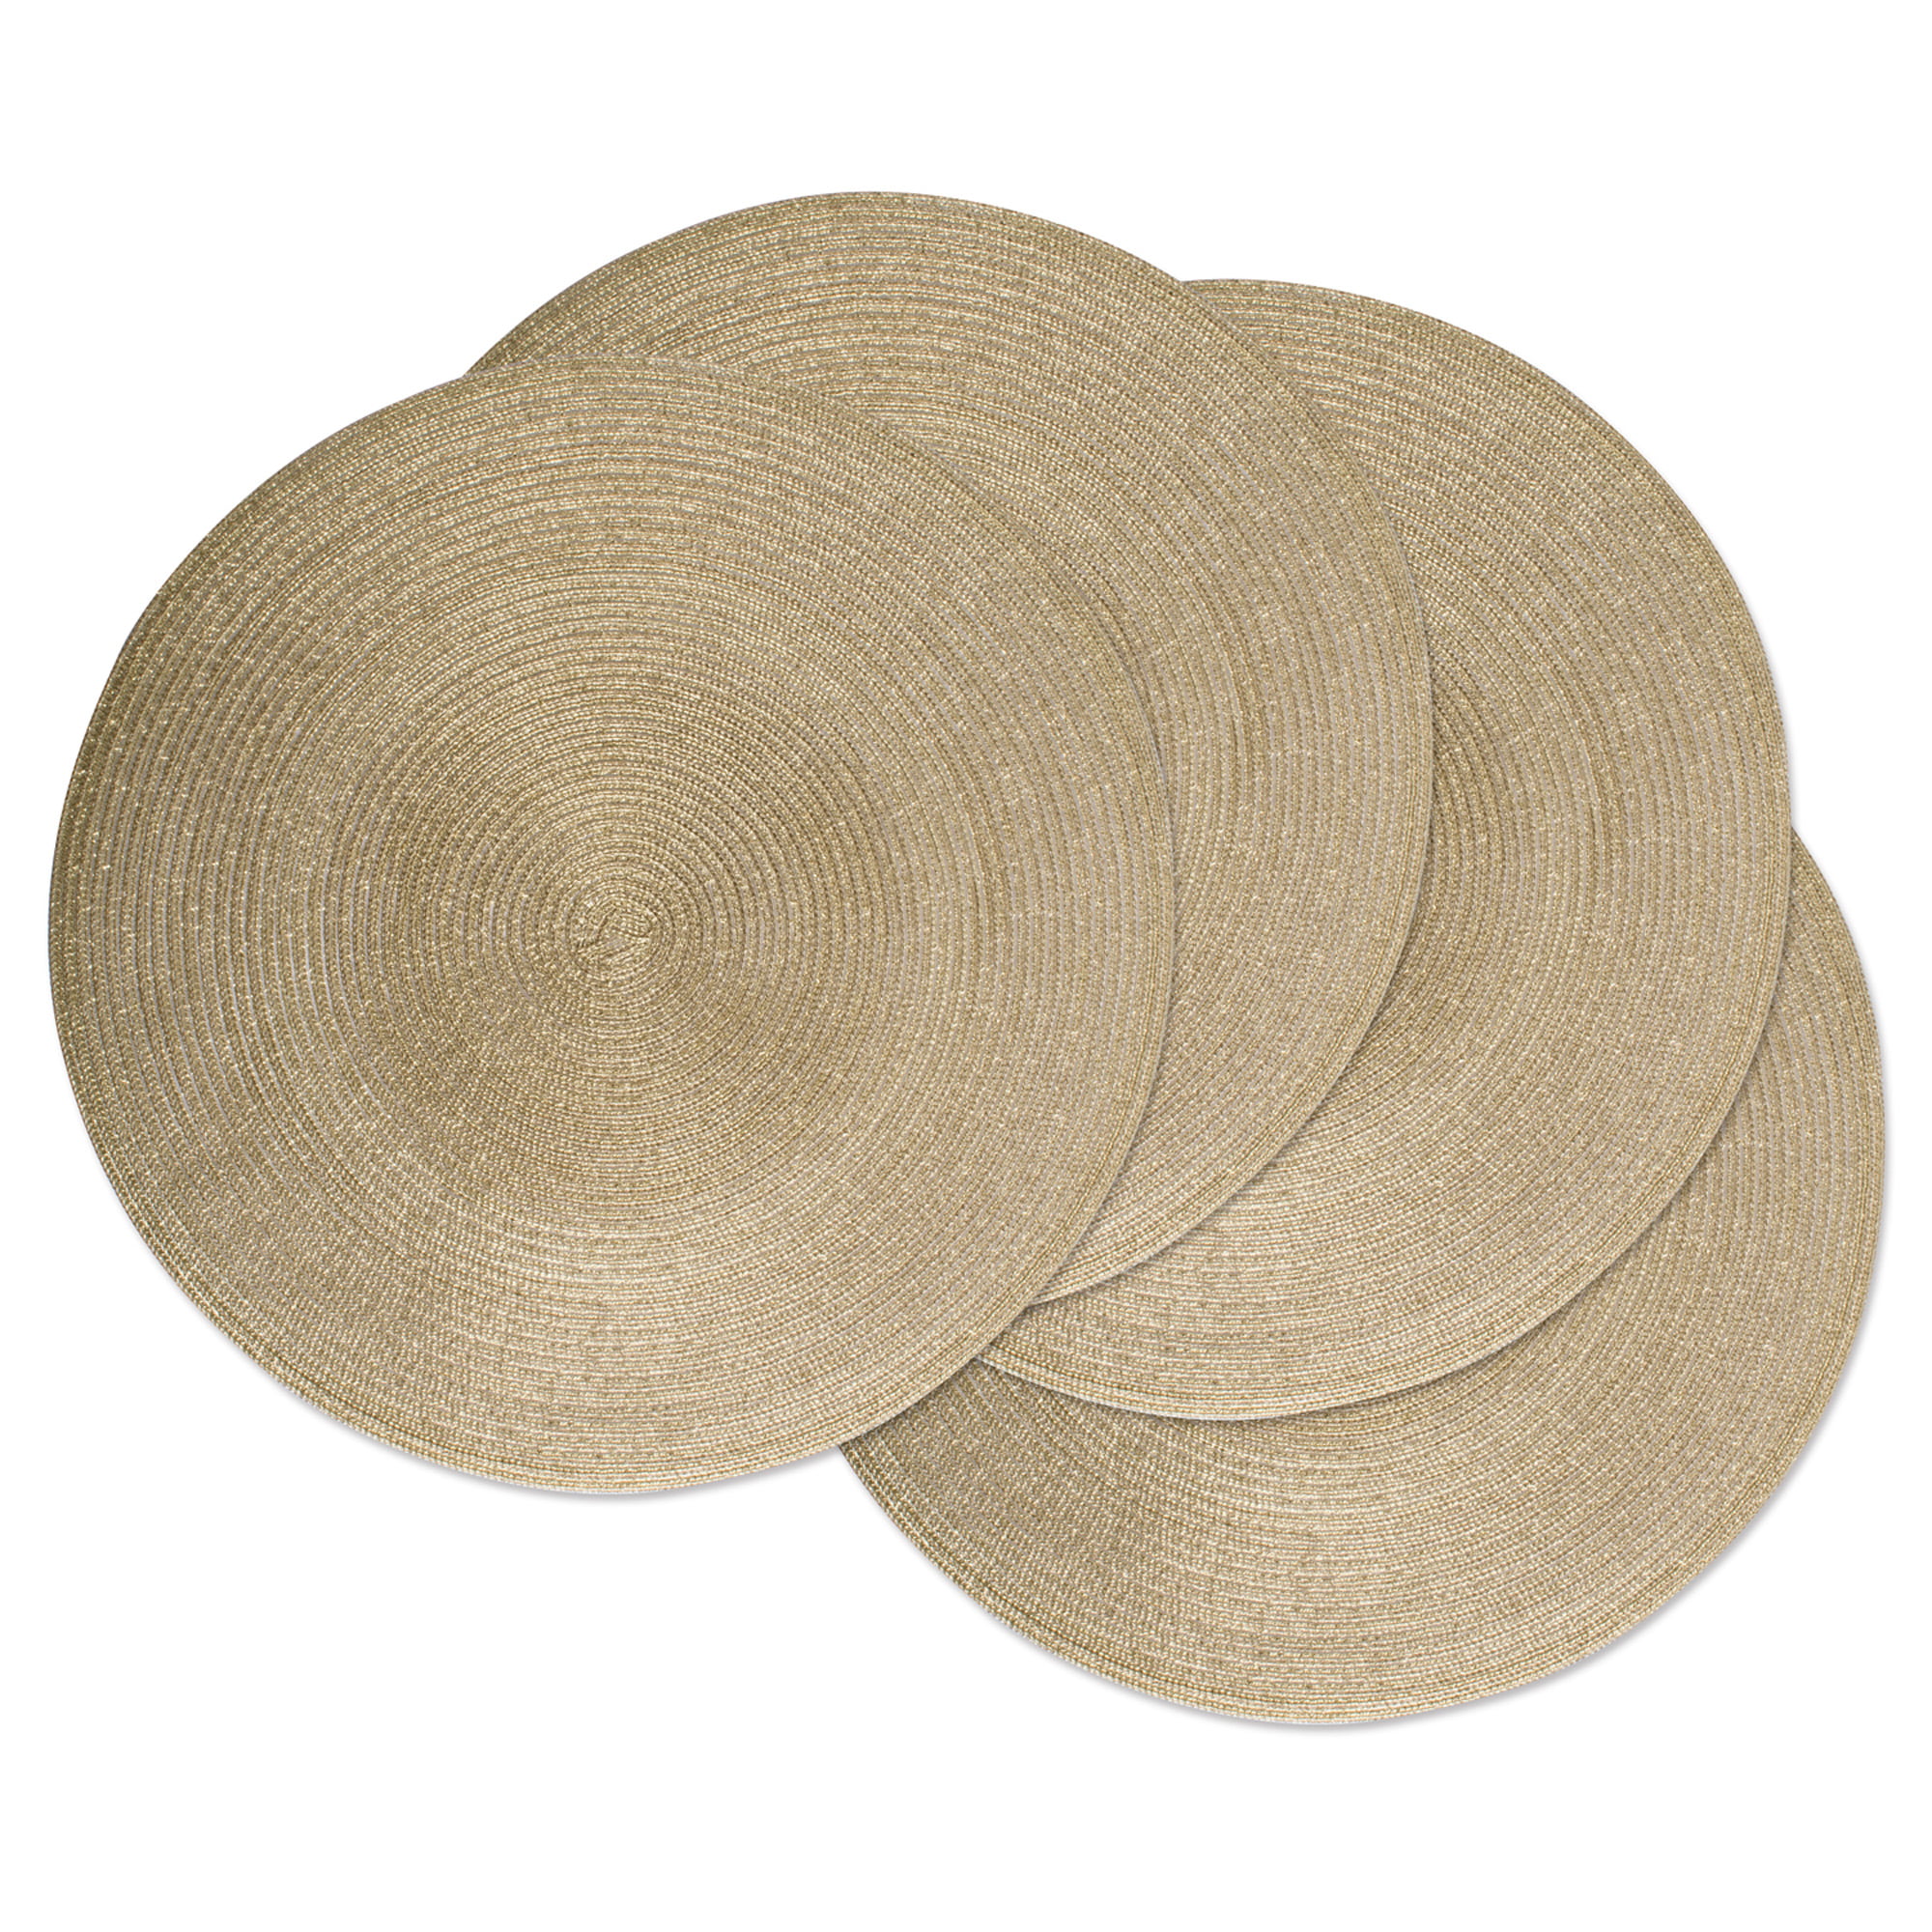 4PCS Natural Grass Woven Placemat Round Braided Tablemat 15 inch for Dining 